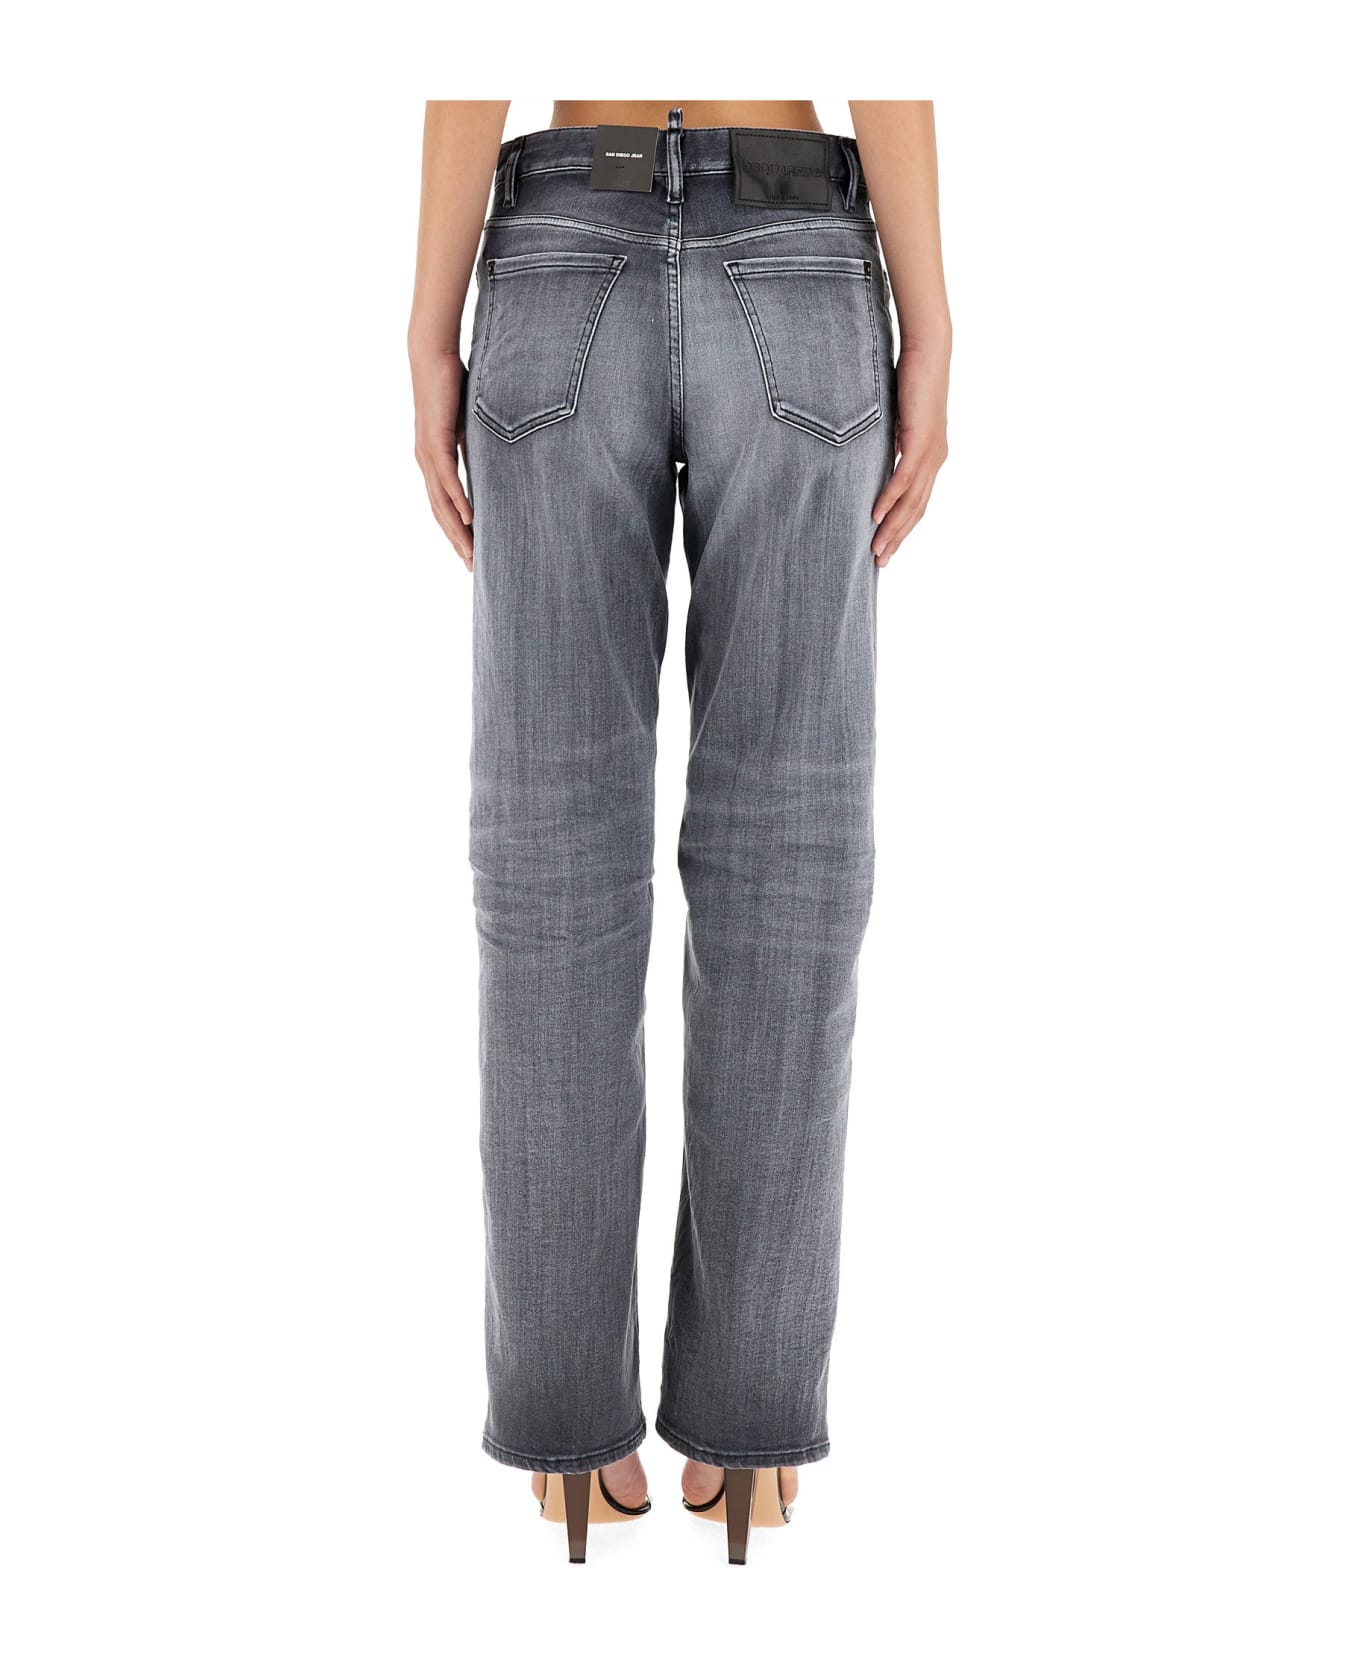 Dsquared2 San Diego Jeans - COL. 900 デニム